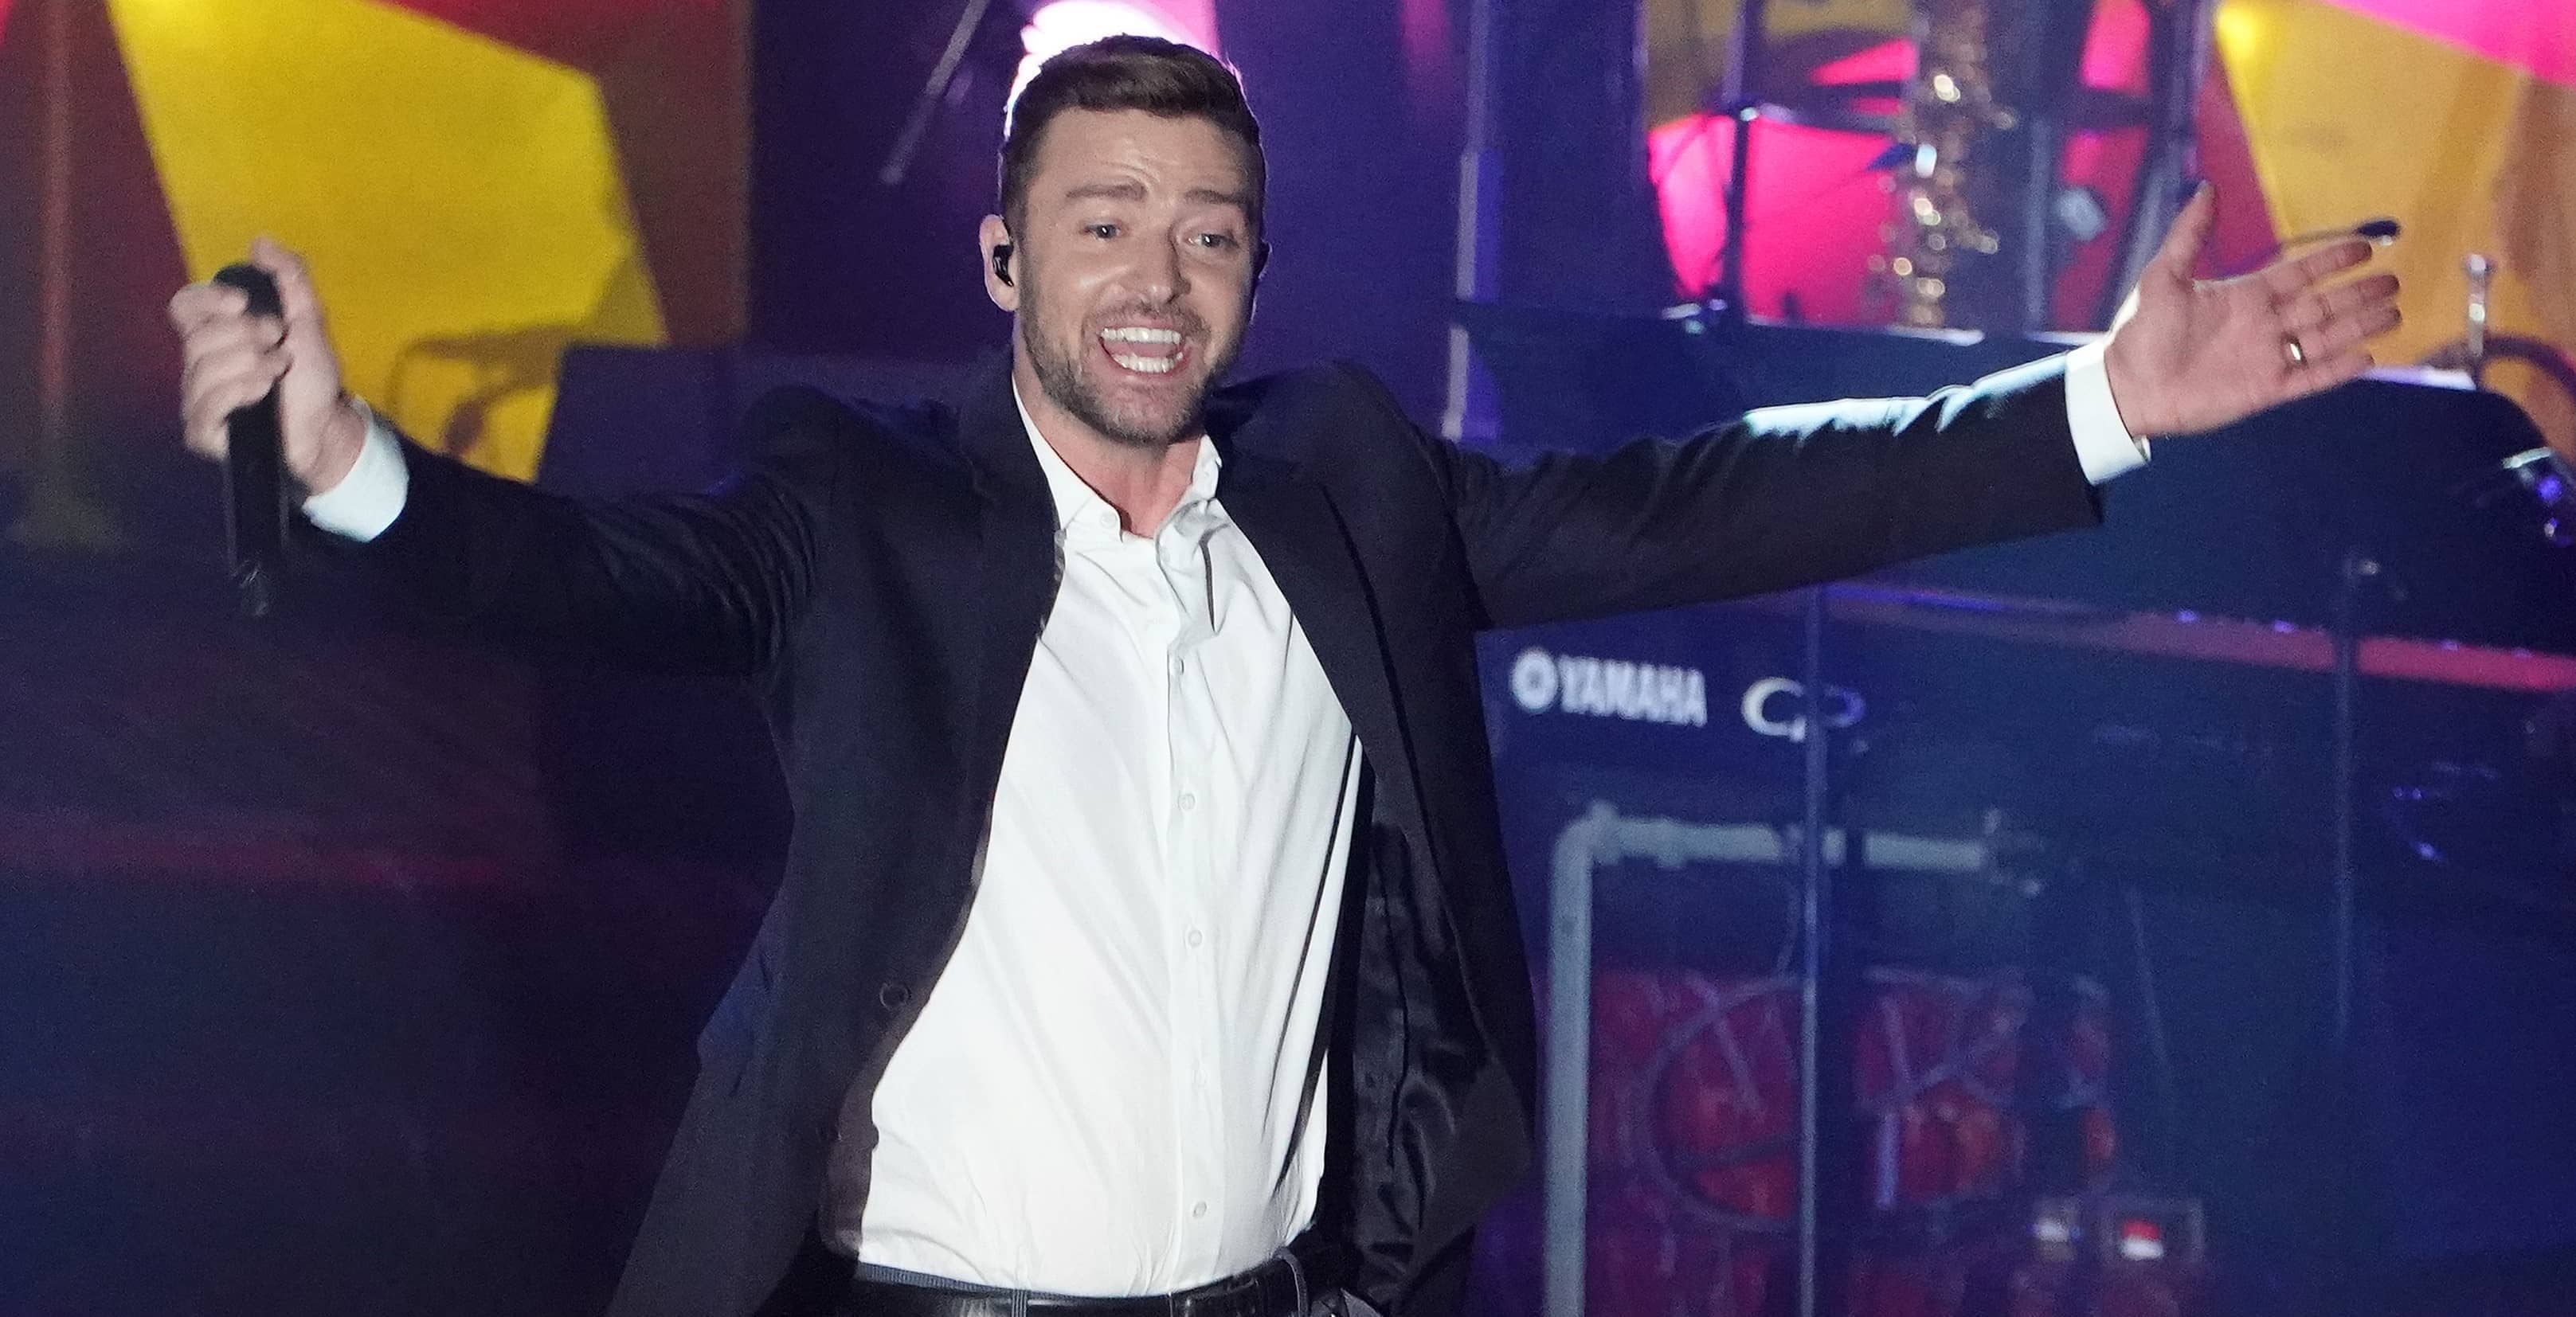 justin-timberlake-performs-during-the-songwriters-hall-of-fame-inductions-in-manhattan